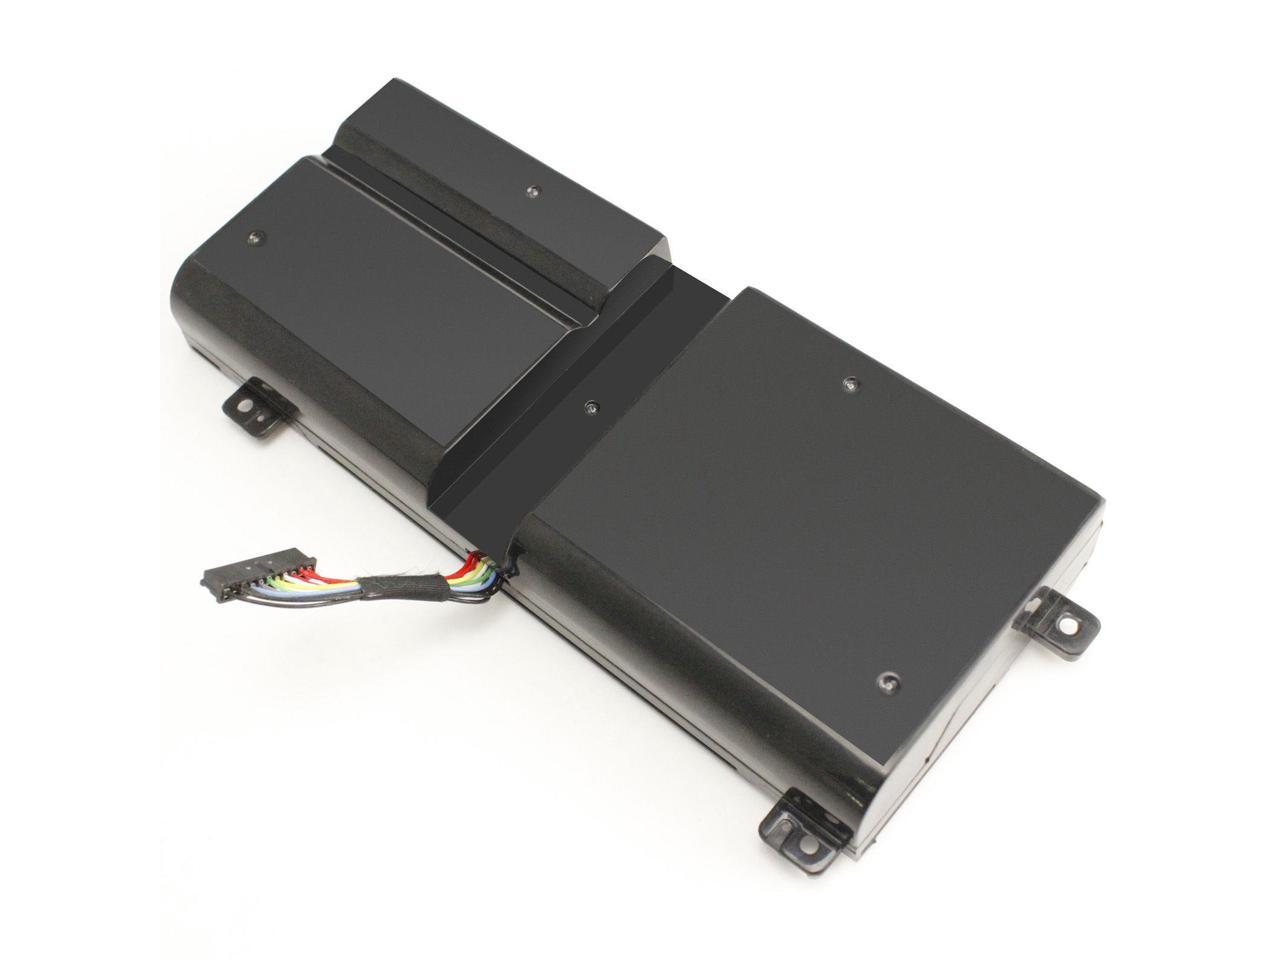 Original Laptop Battery for DELL Alienware 14 A14 M14X R3 R4 G05YJ 0G05YJ Y3PN0 8X70T